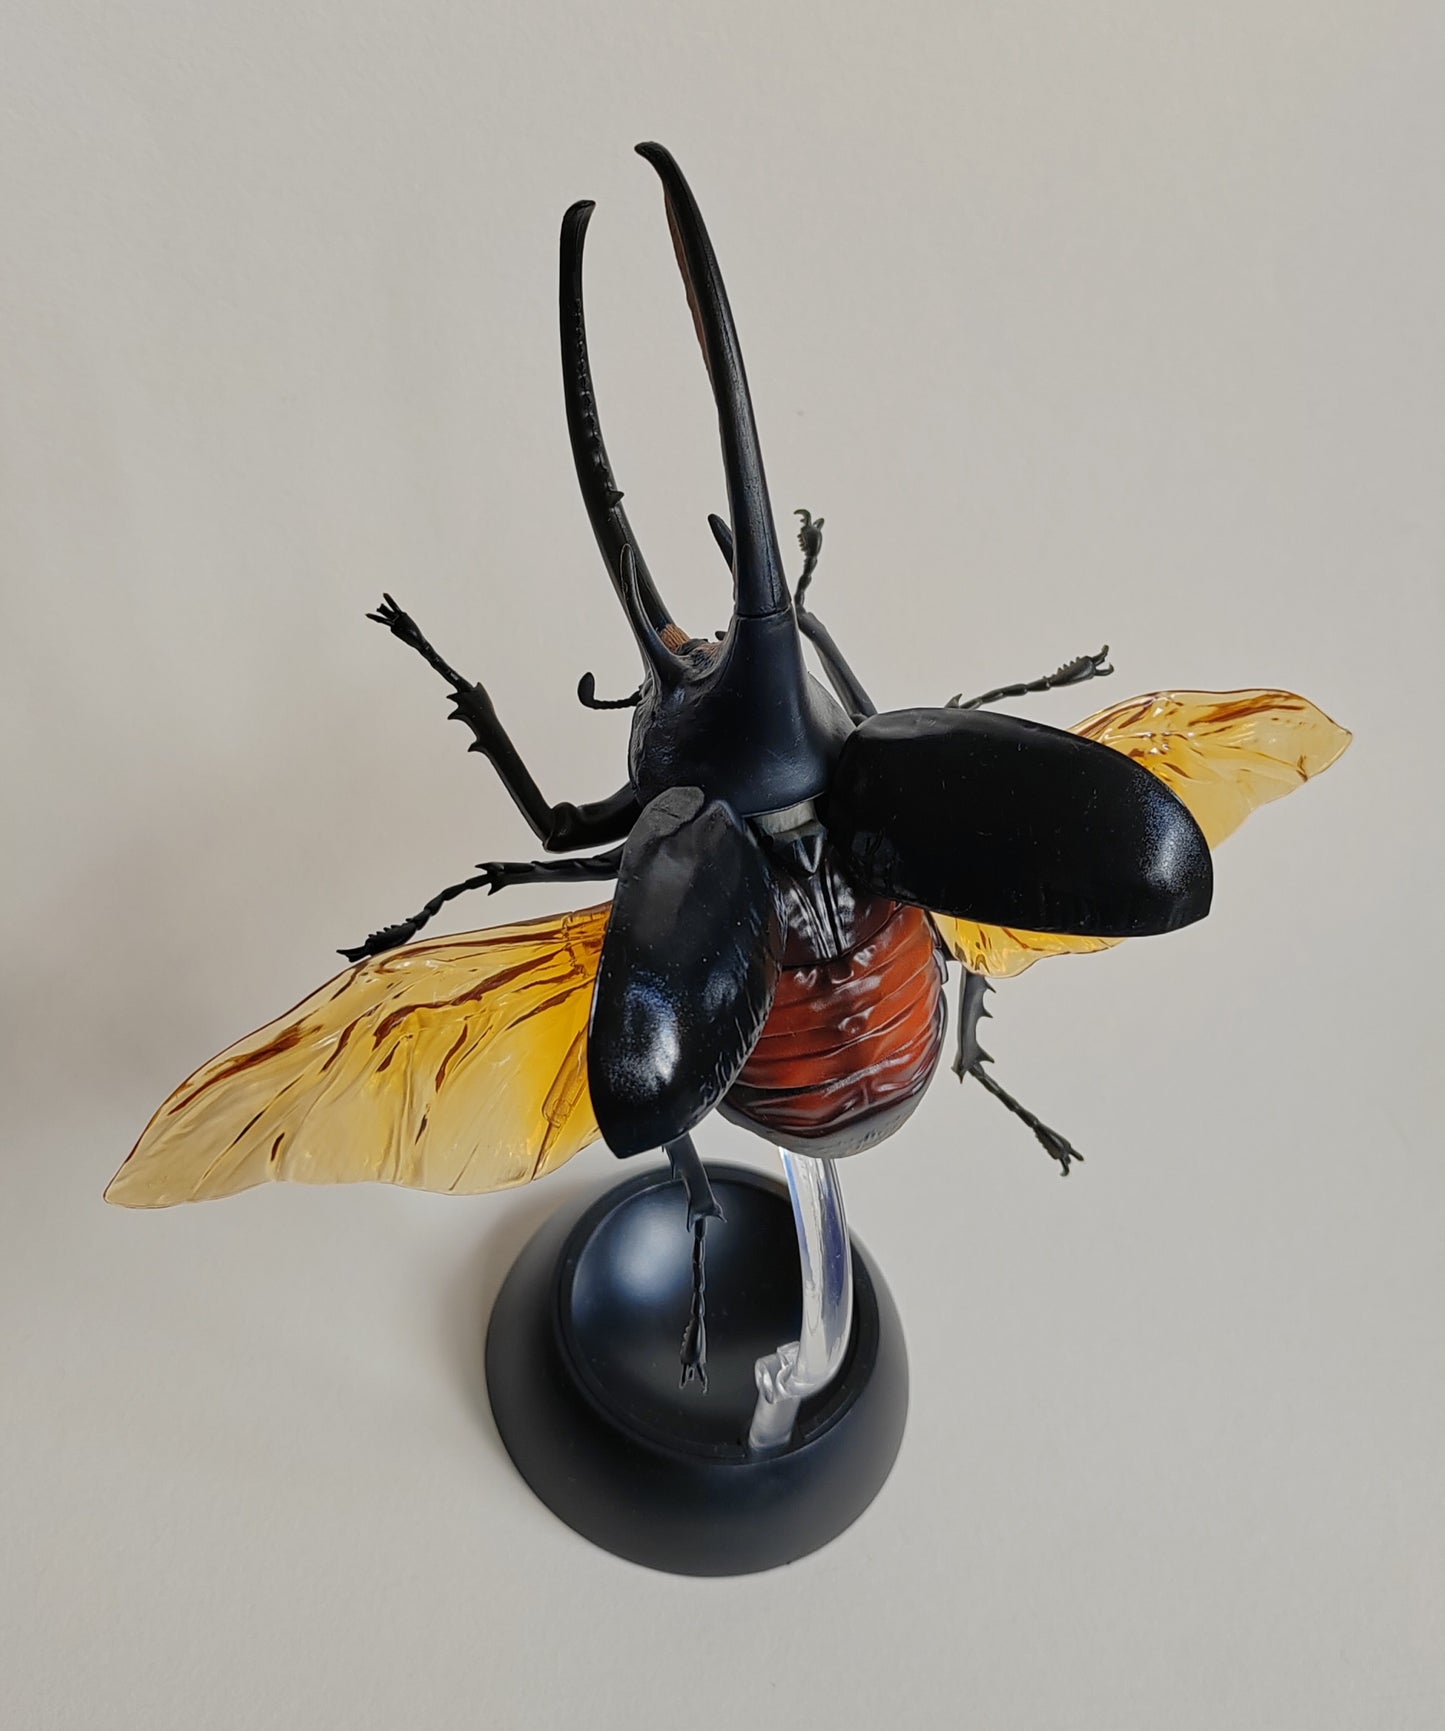 Japanese Beetle figures by Bandai (& others!)